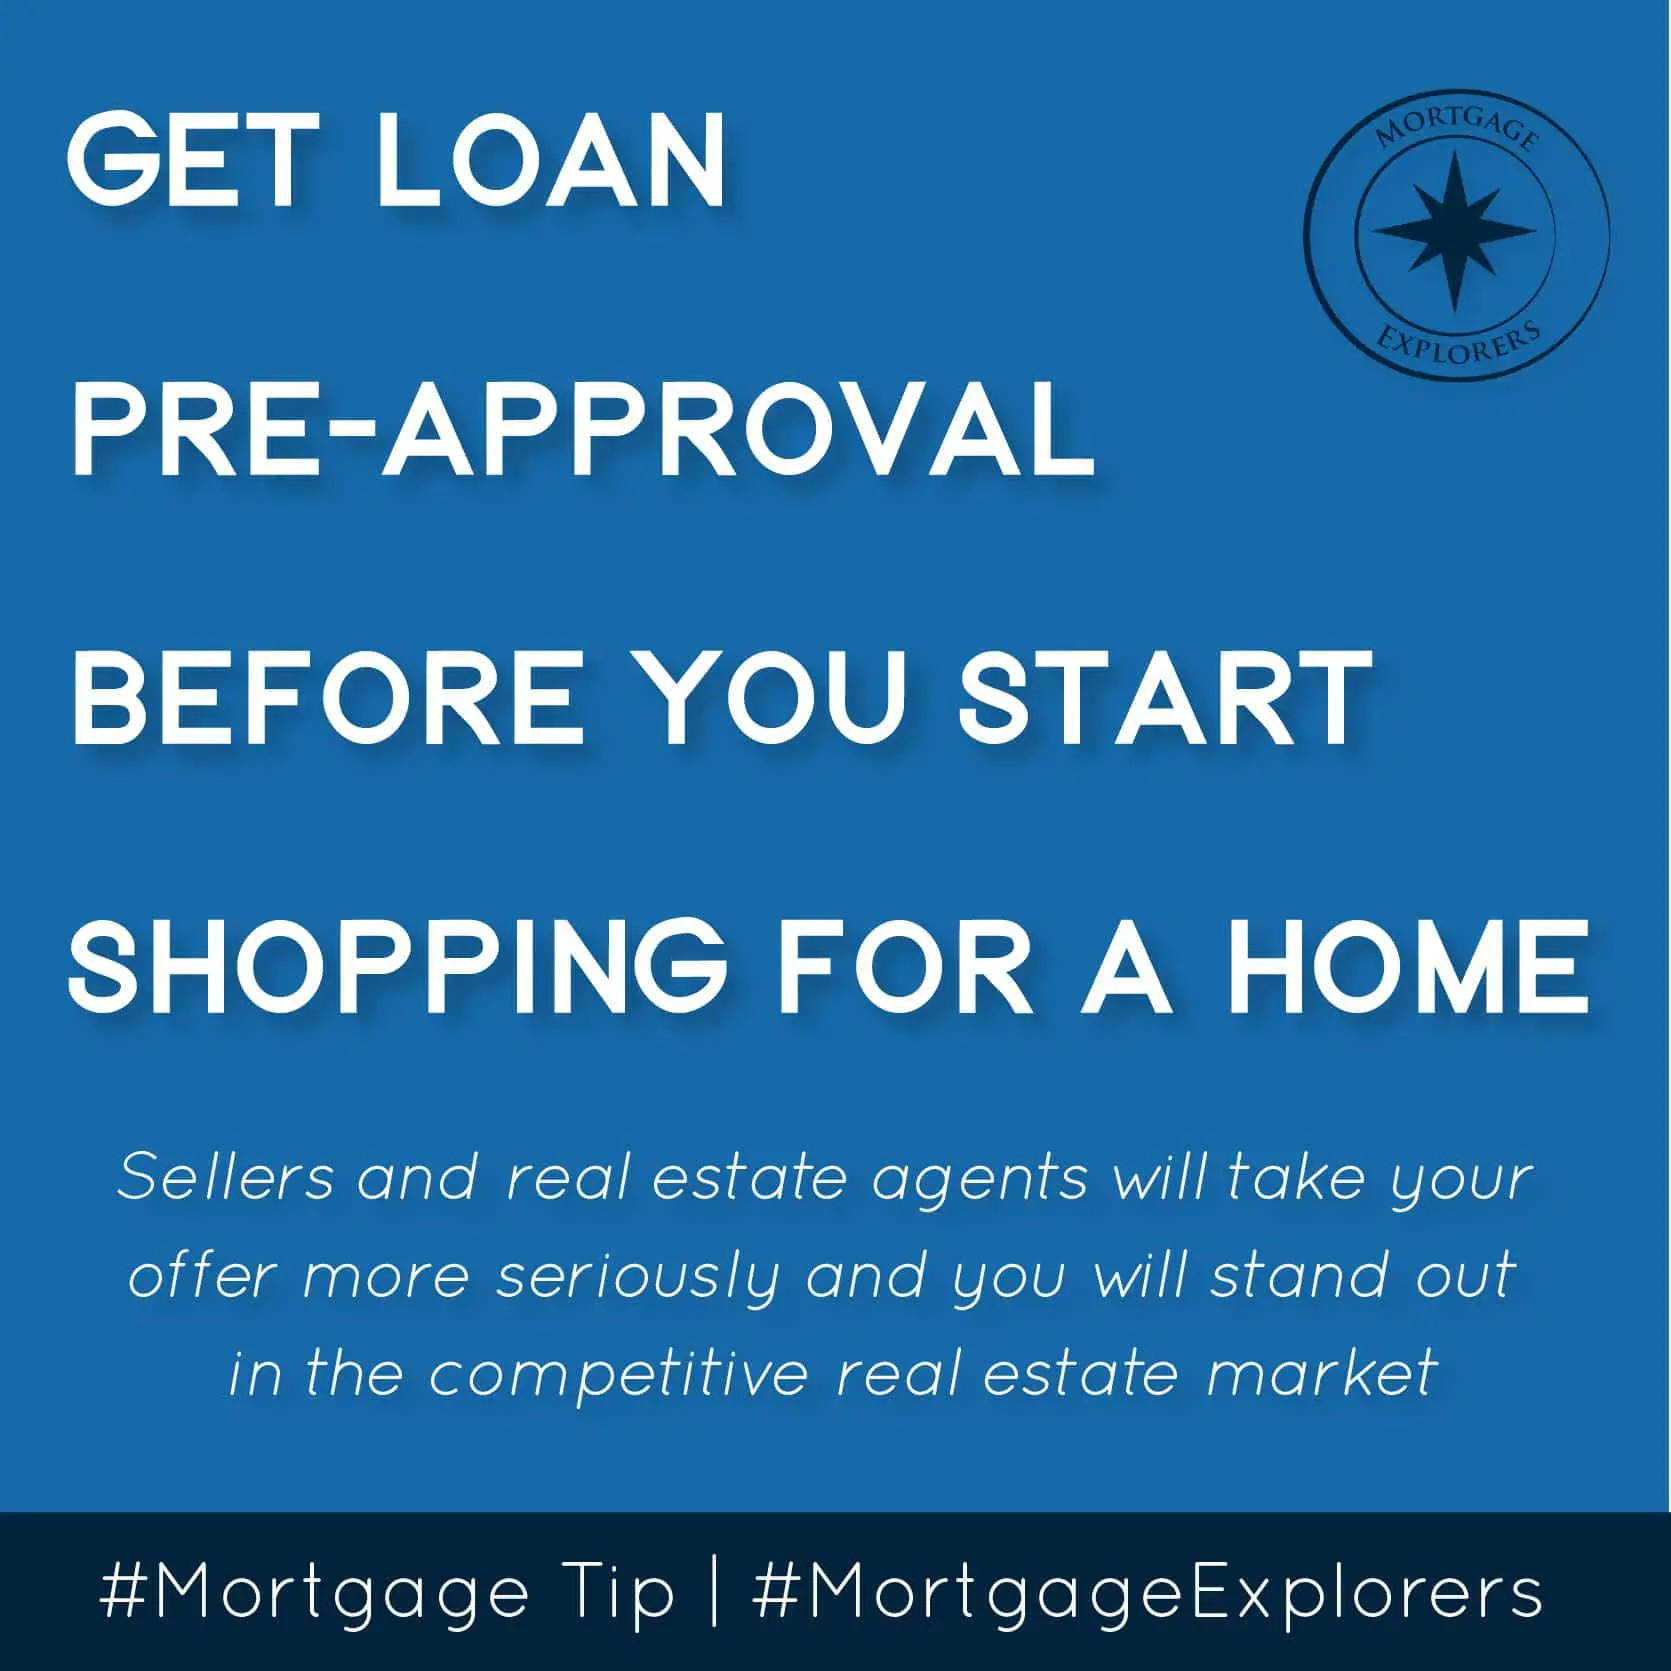 Mortgage Tip of the Day Get loan pre